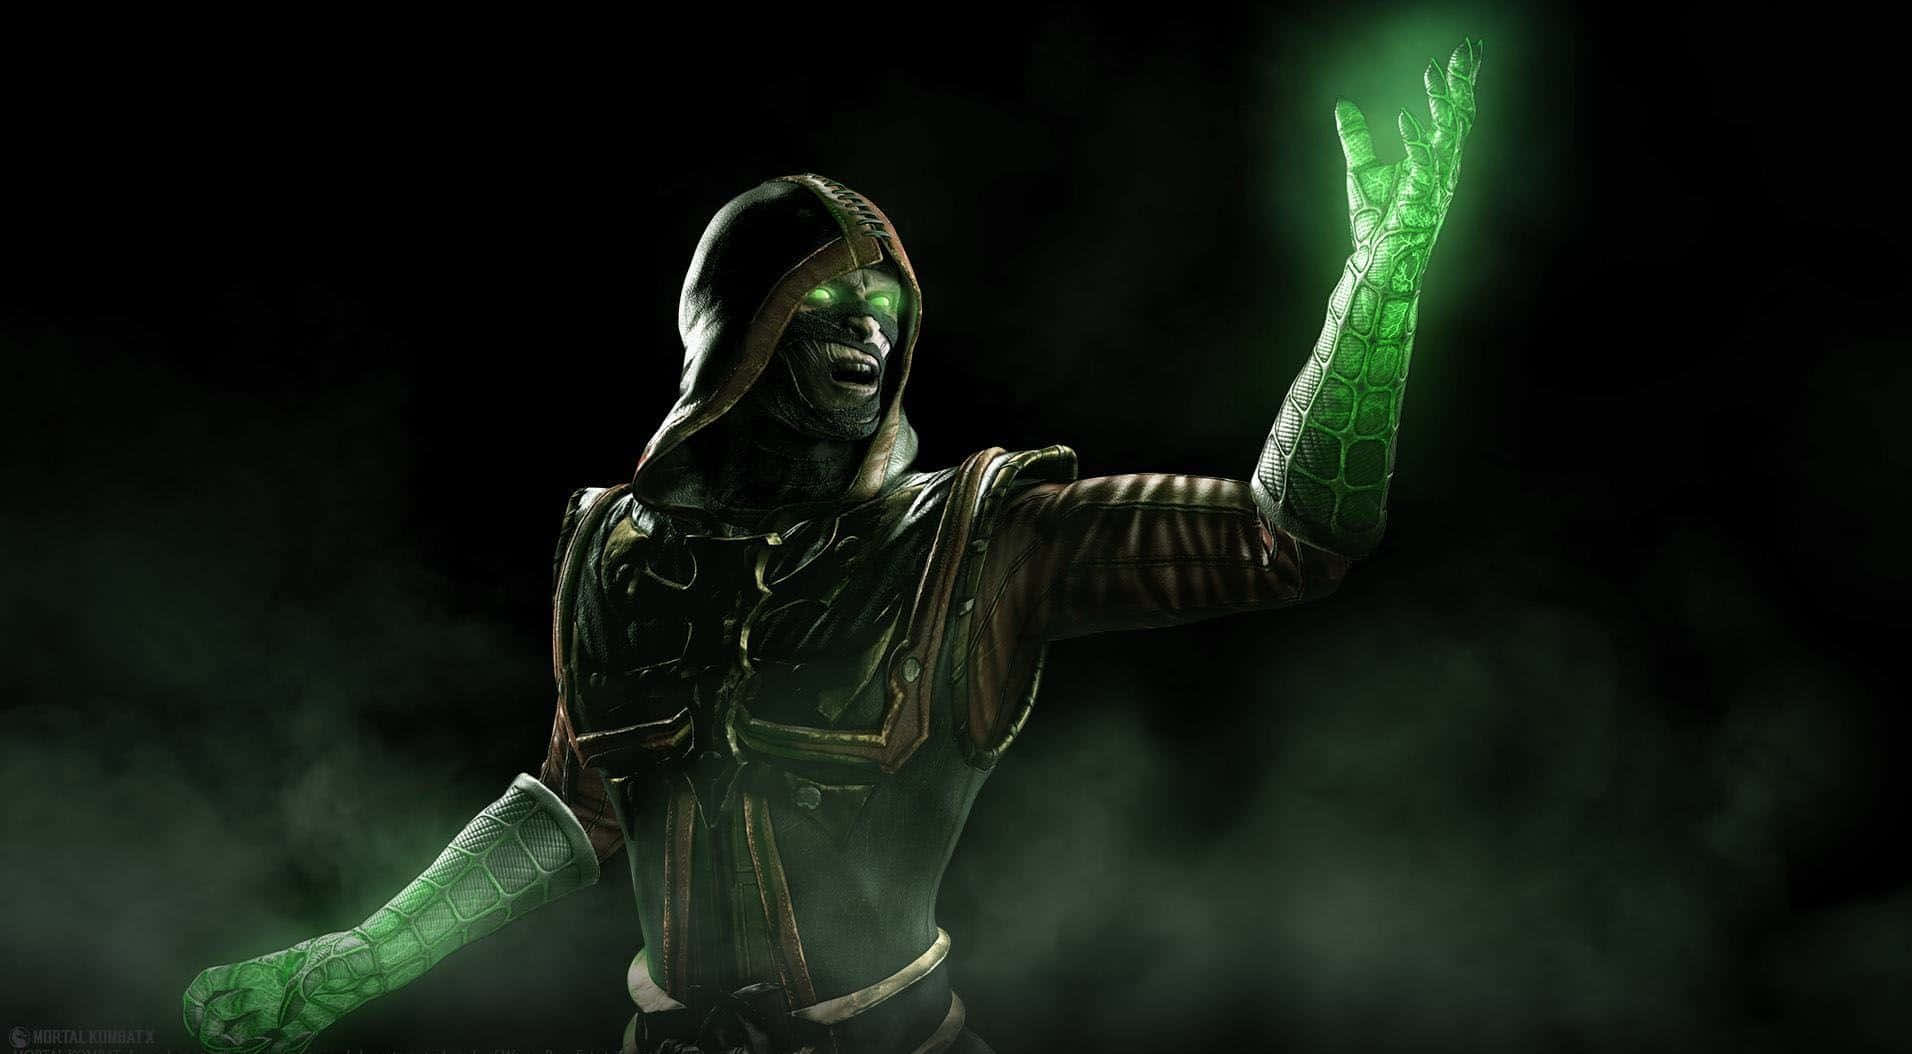 Mortal Kombat X - The Spectacular Showdown Of Legendary Fighters Background